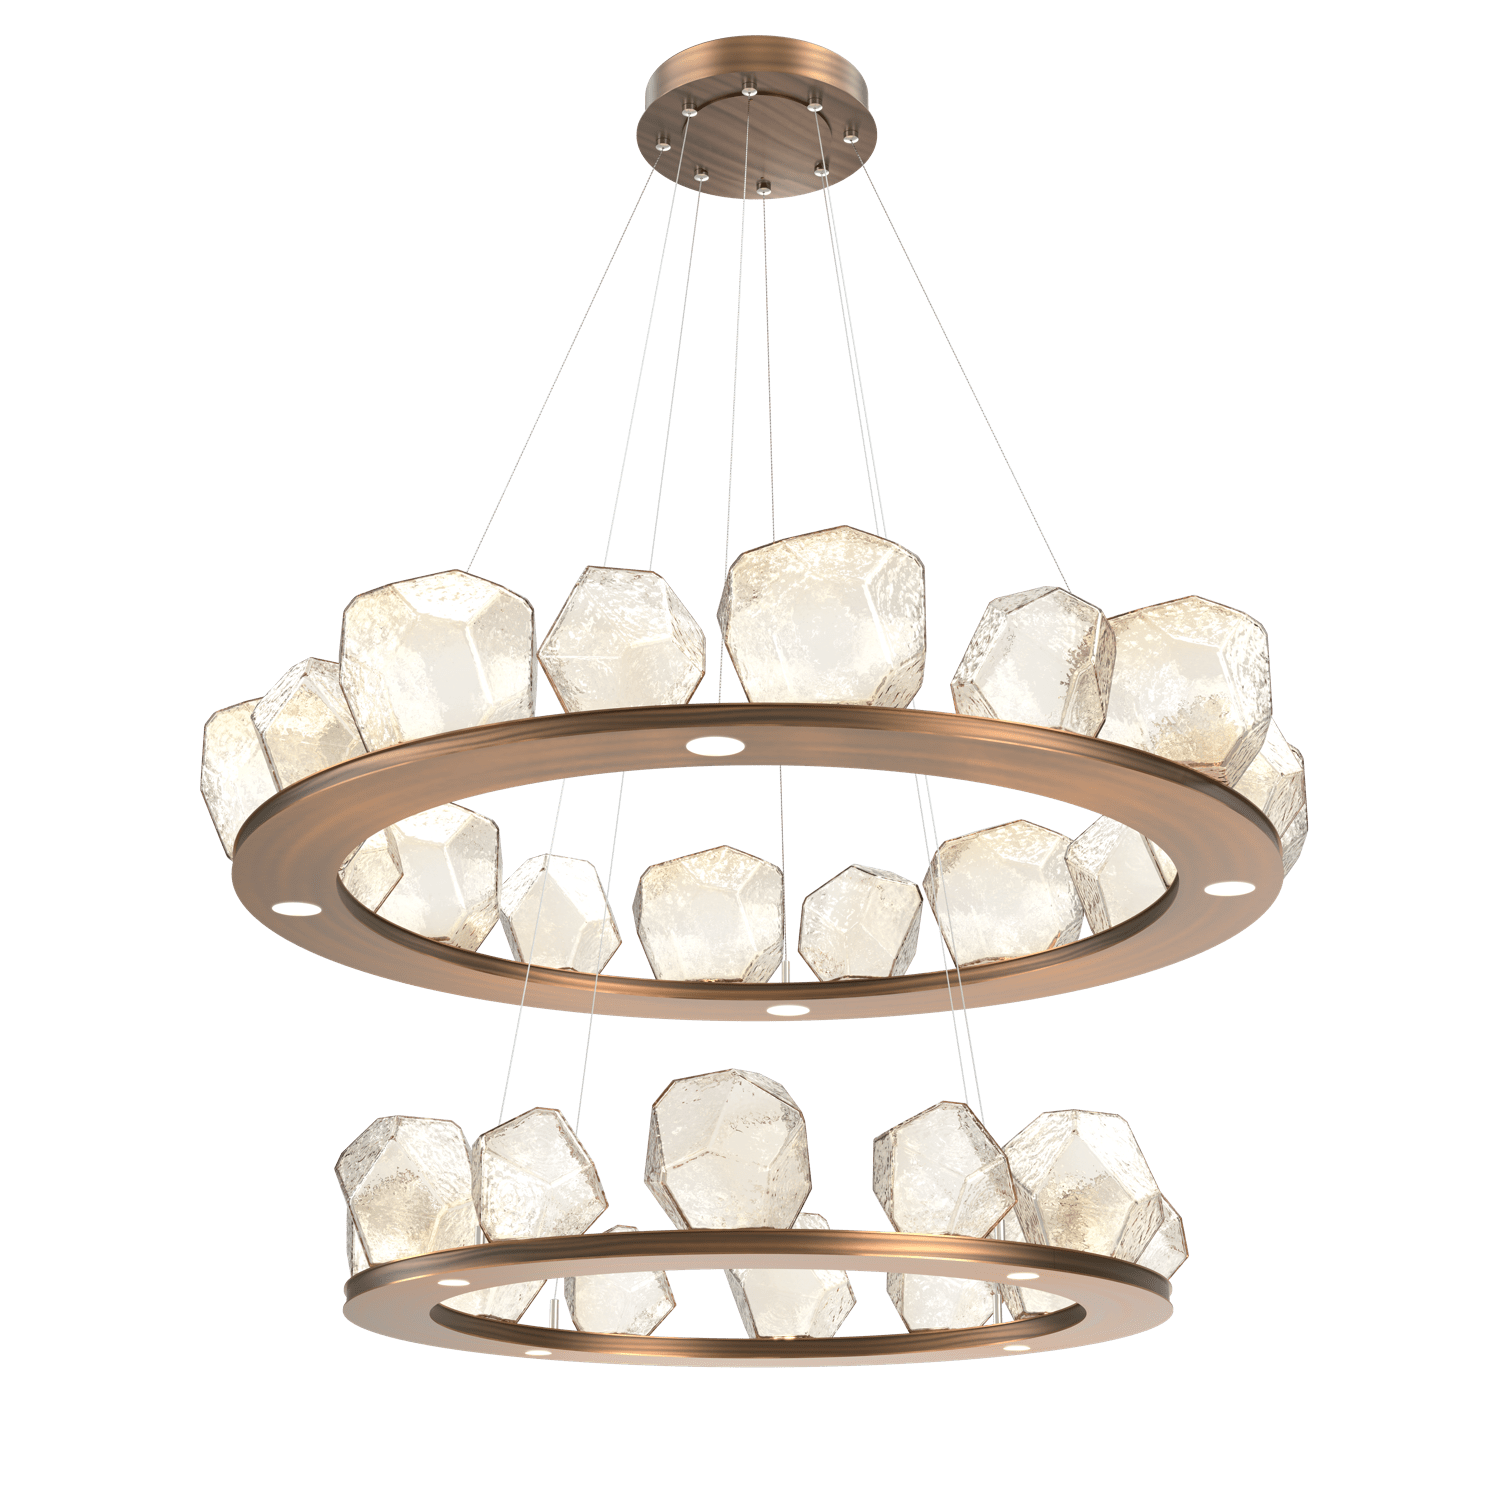 CHB0039-2B-RB-A-Hammerton-Studio-Gem-48-inch-two-tier-ring-chandelier-with-oil-rubbed-bronze-finish-and-amber-blown-glass-shades-and-LED-lamping